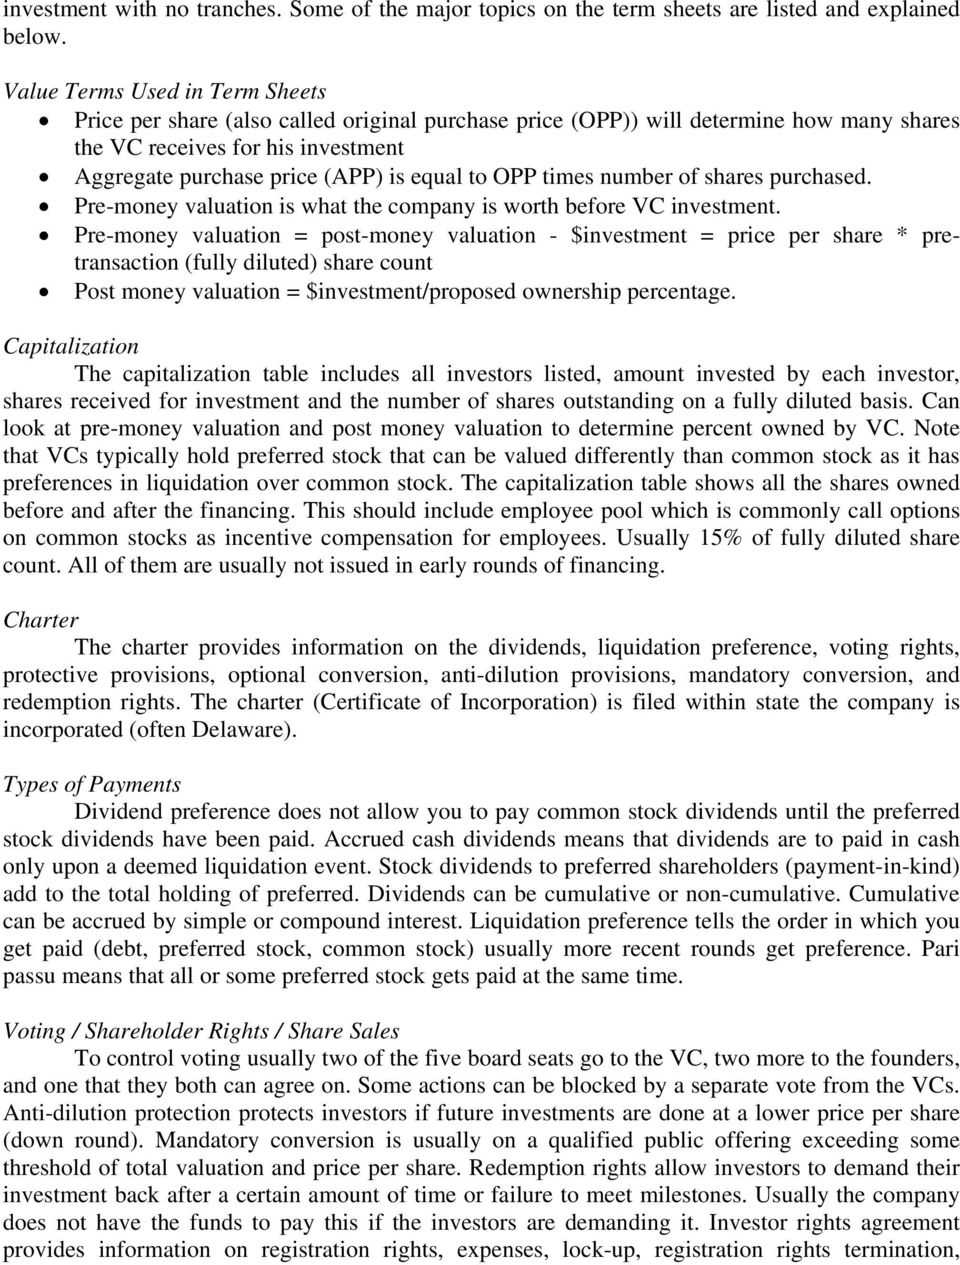 Venture Capital Term Sheet: An Exercise In Negotiation – Pdf Within Convertible Note Term Sheet Template